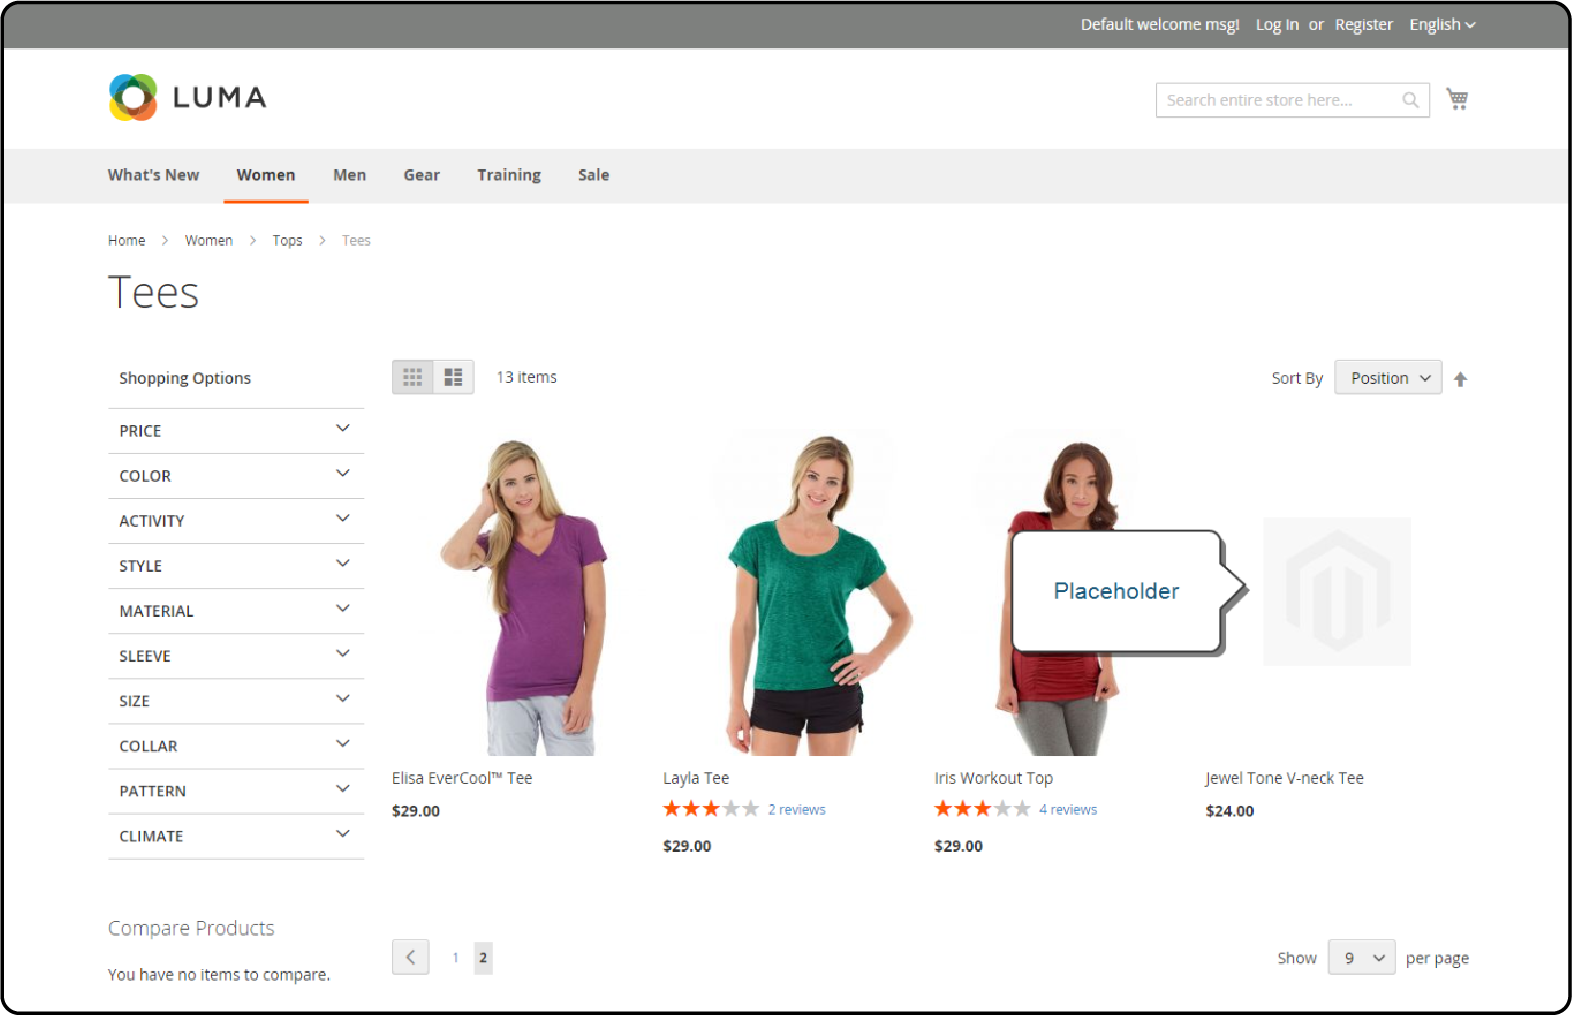 Magento 2 Placeholder Image functionality enhancing online store user experience